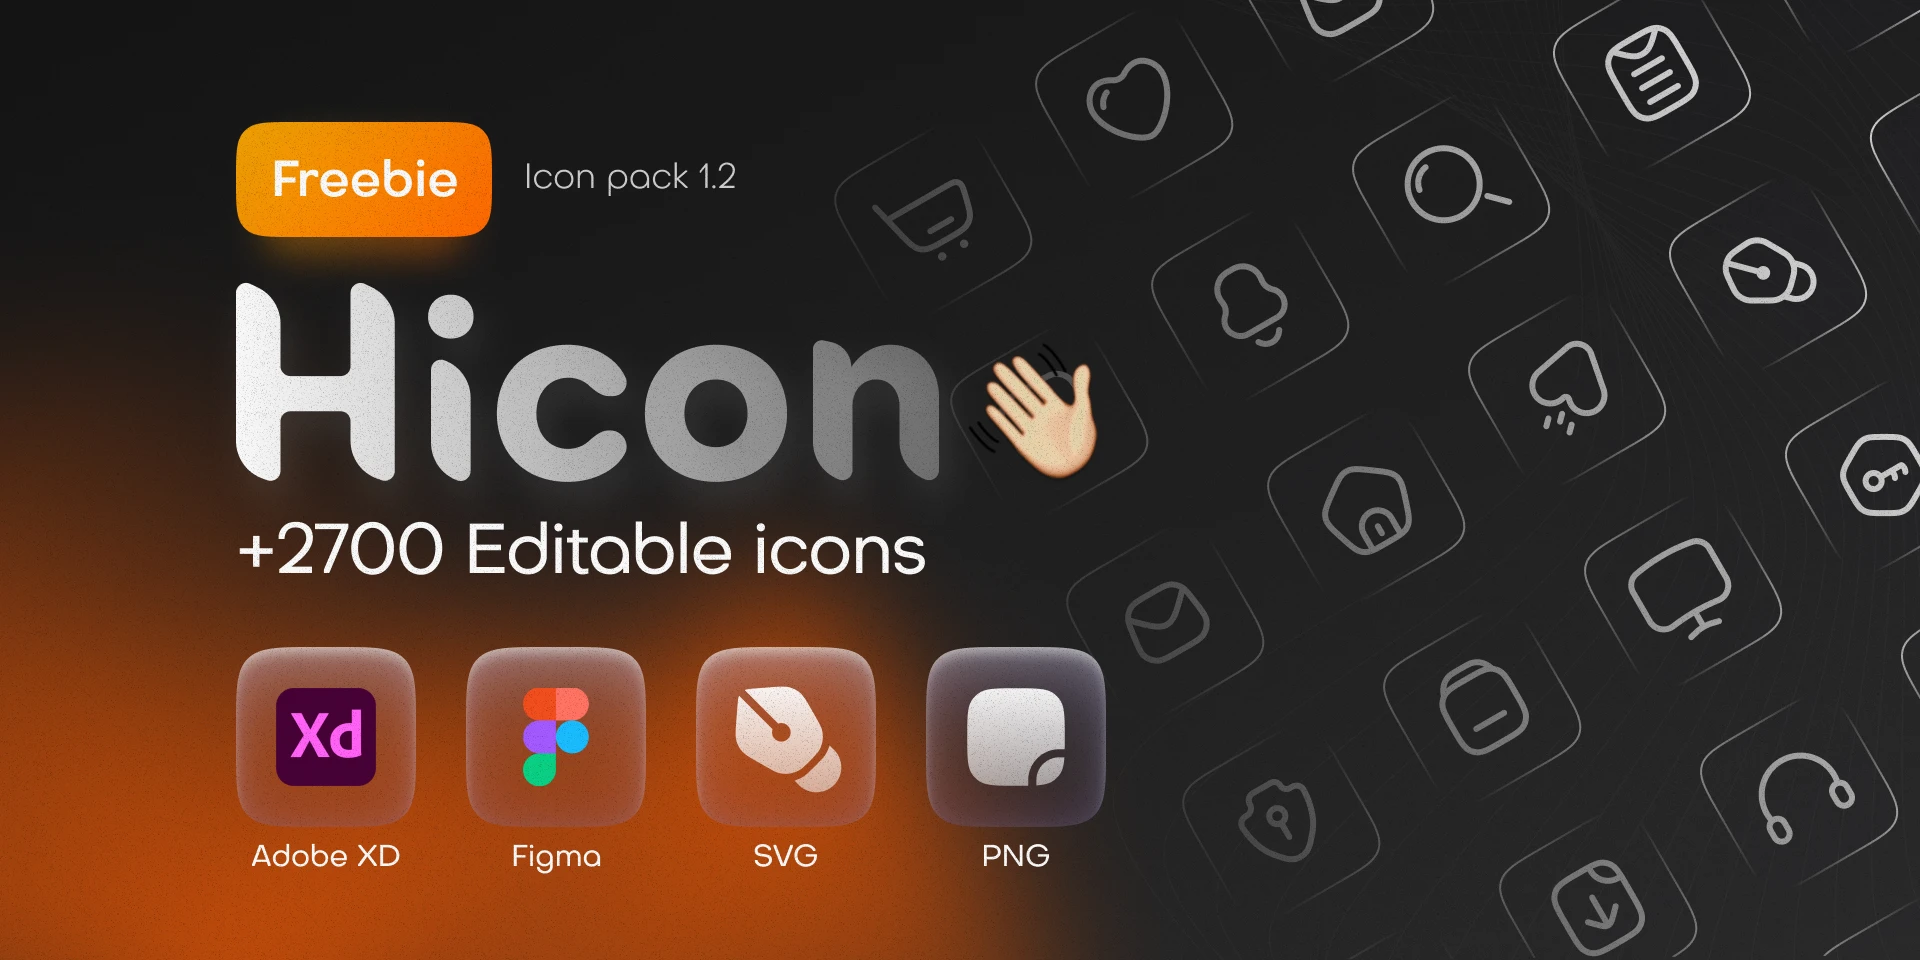 Hicon (Free icon pack) - +2700 Editable icons for Figma and Adobe XD